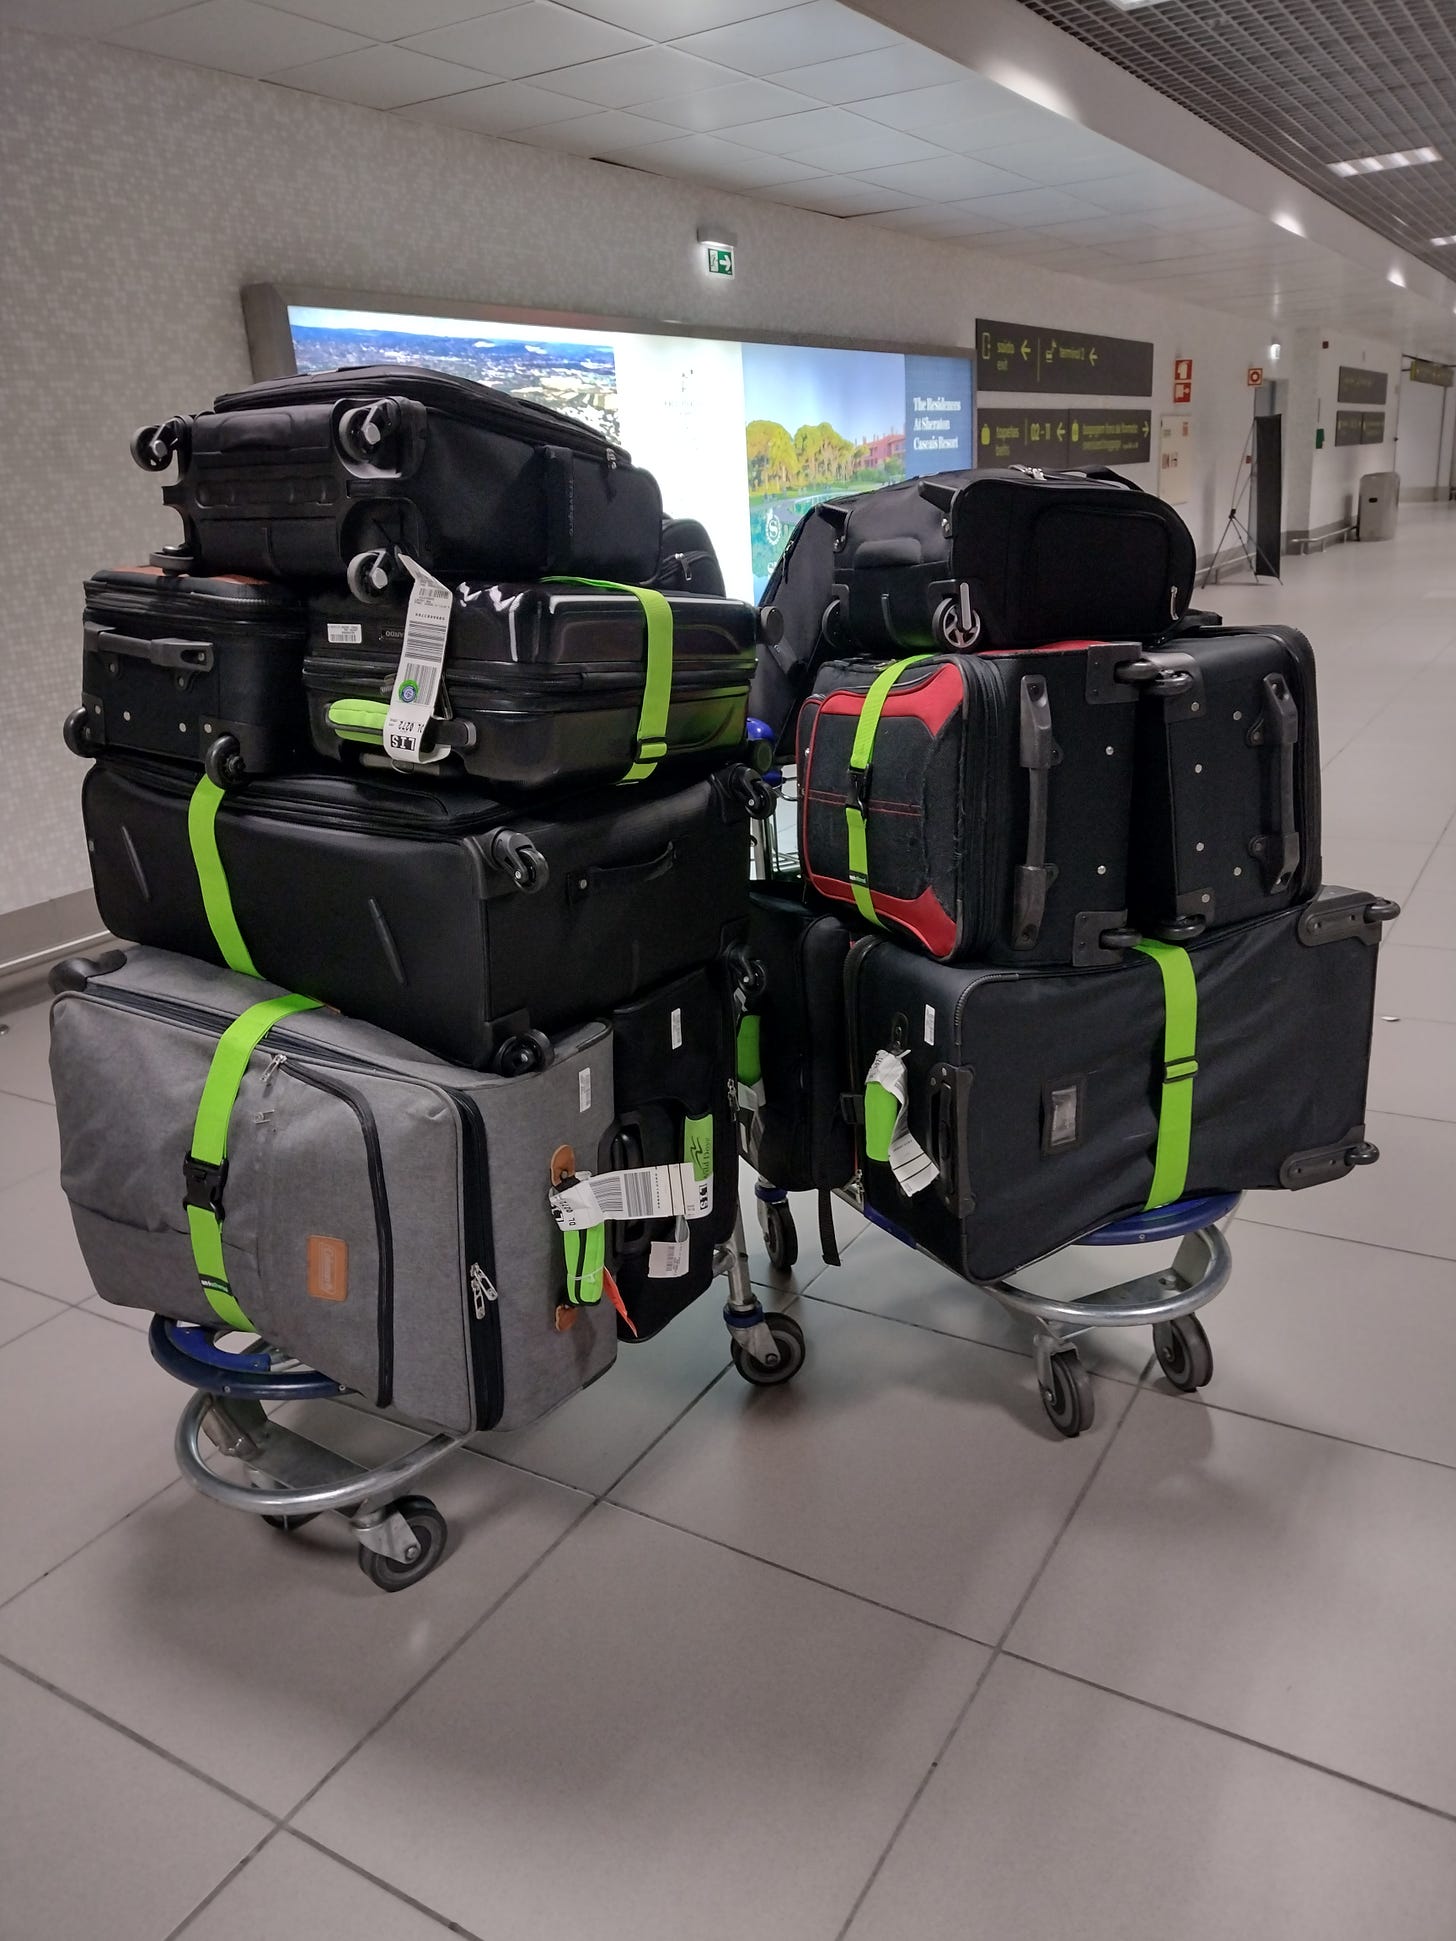 Suitcases piled in the airport